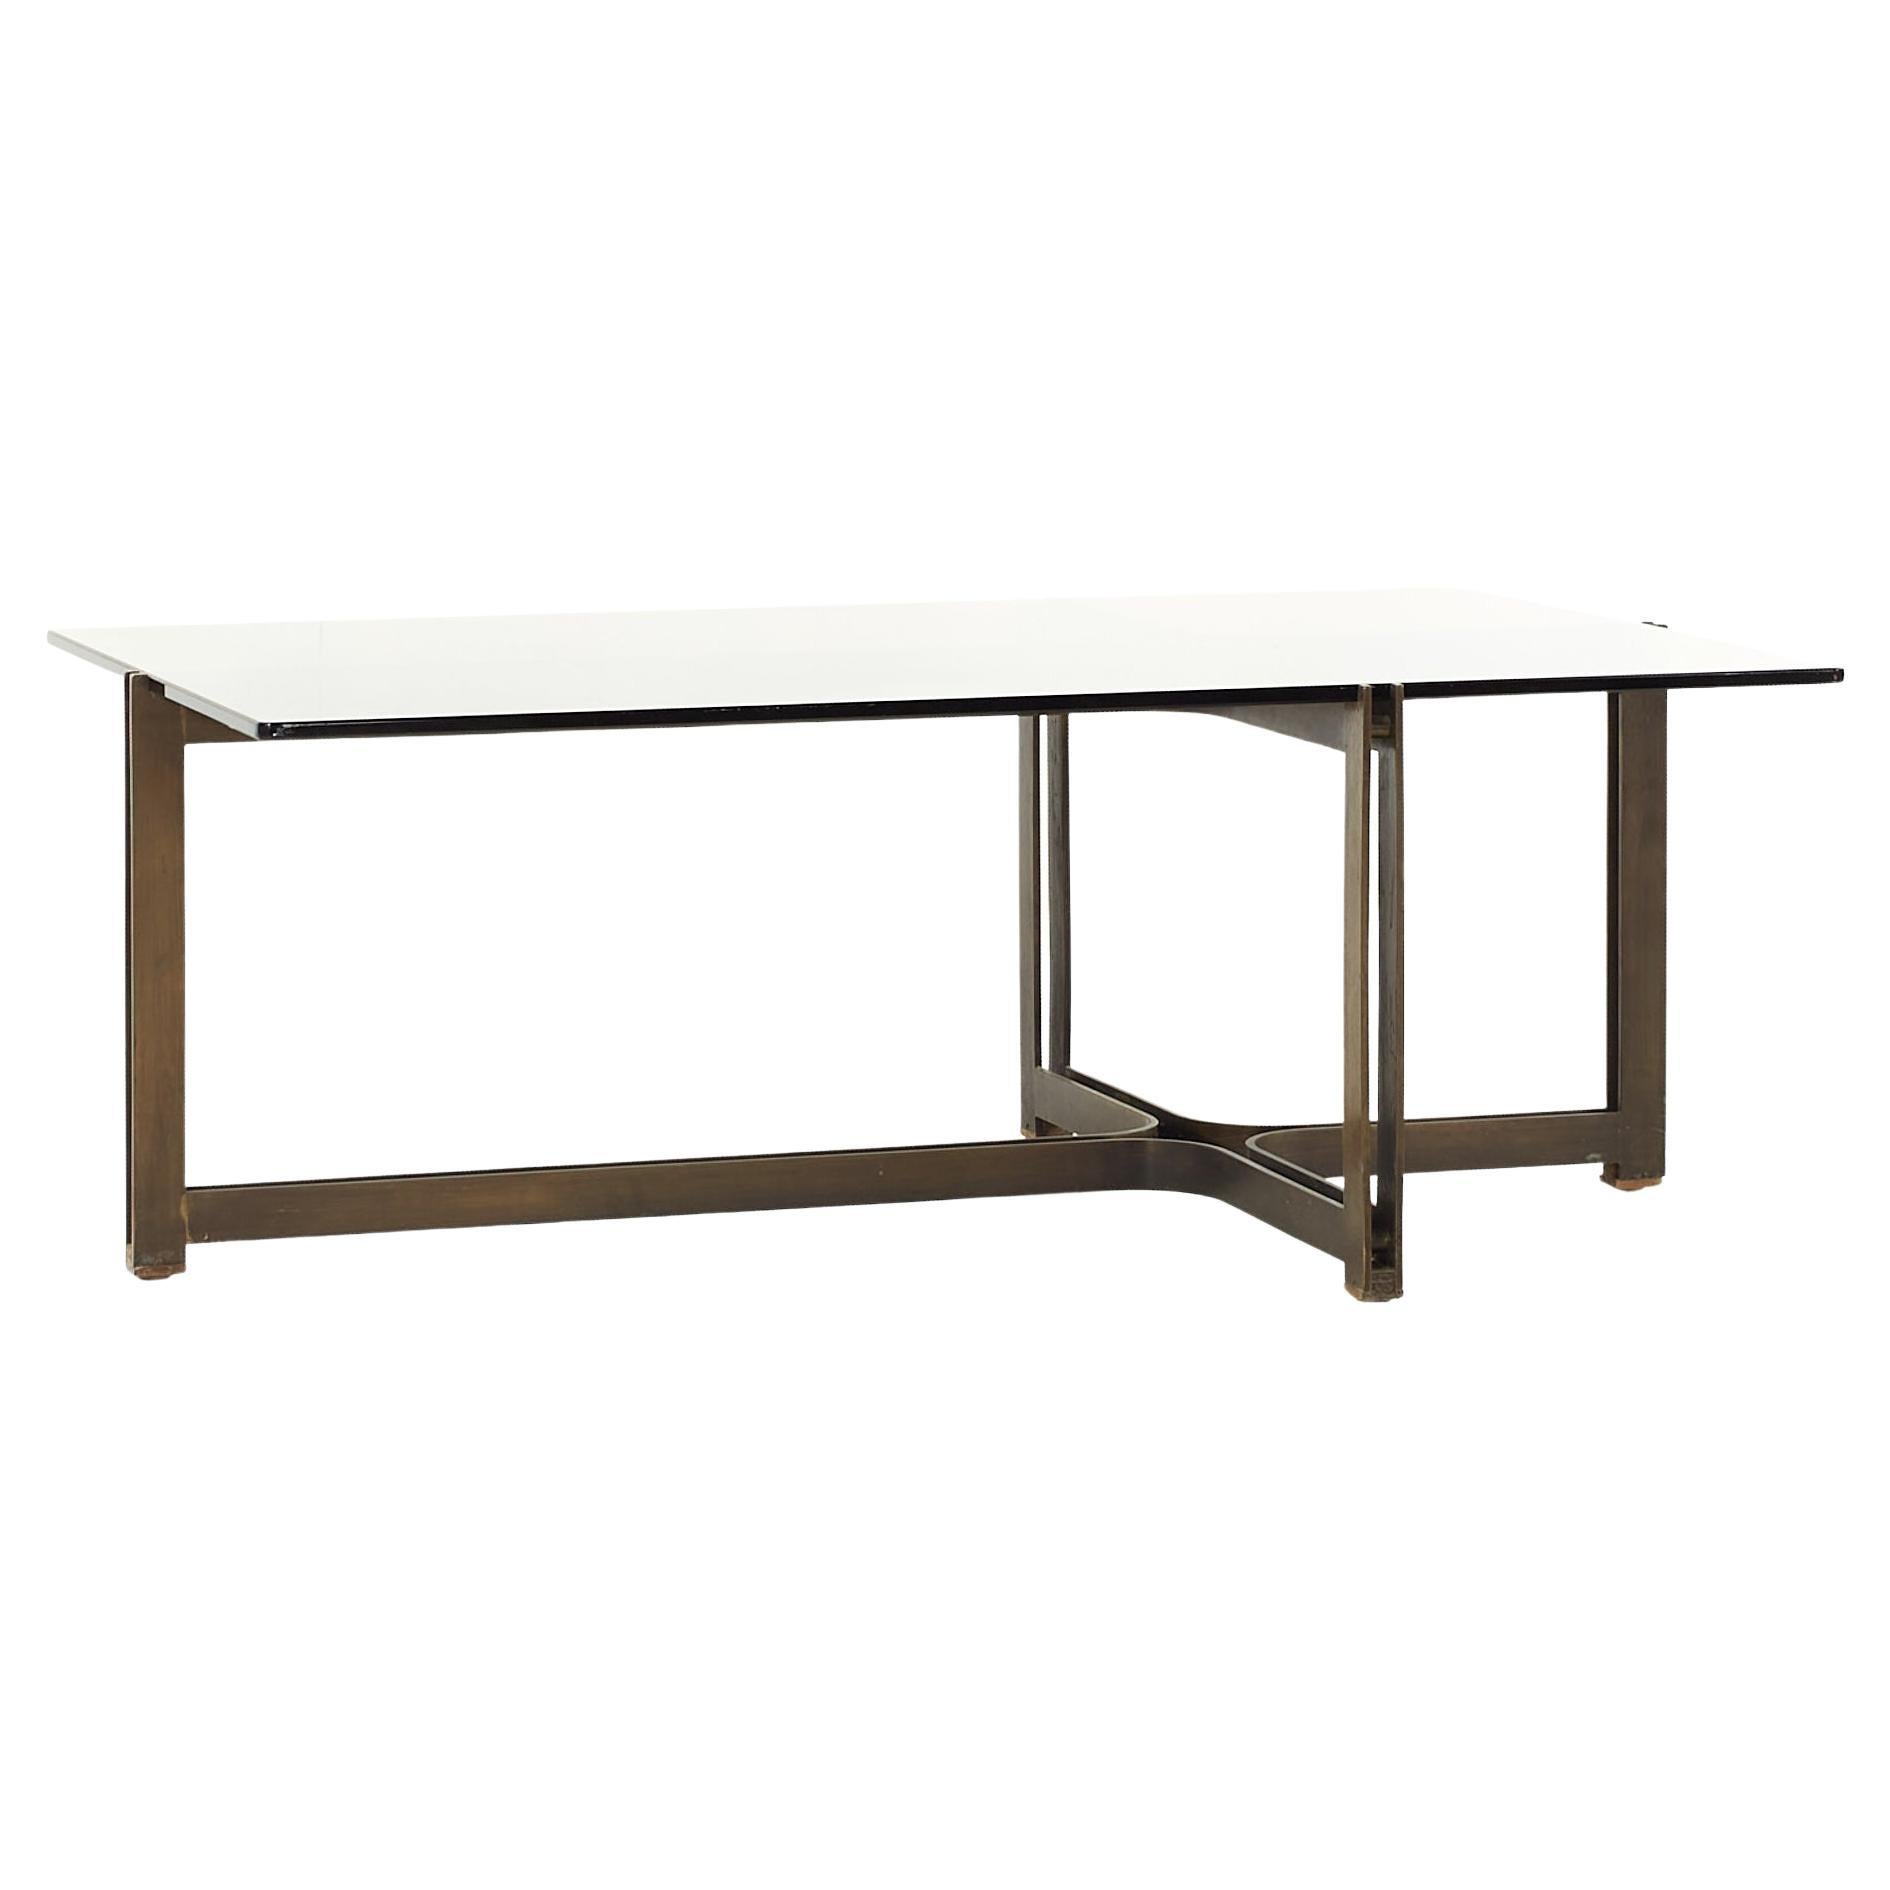 Roger Sprunger for Dunbar Mid-Century Bronze Coffee Table